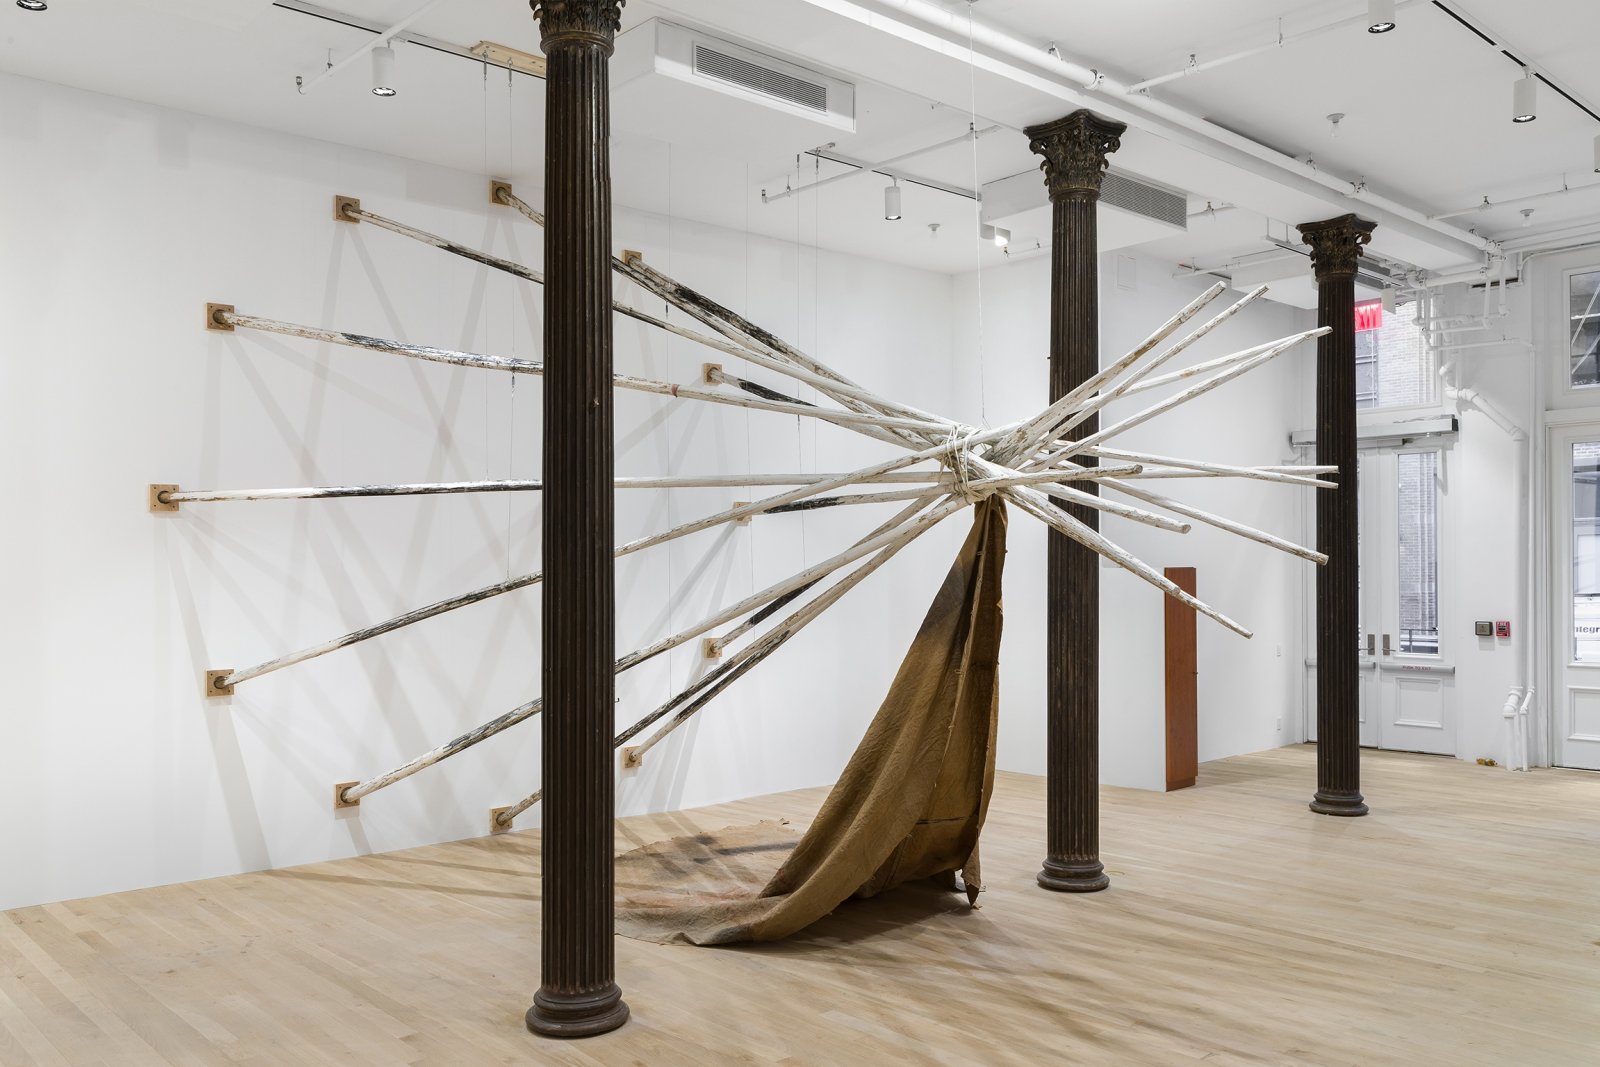 Duane Linklater, dislodgevanishskinground, 2019, 12 teepee poles, steel cable, white paint, charcoal, rope, digital print on linen, black tea, blueberry extract, sumac, charcoal, 220 x 174 x 174 in. (559 x 442 x 442 cm). Installation view, Artists Space, New York, USA, 2019